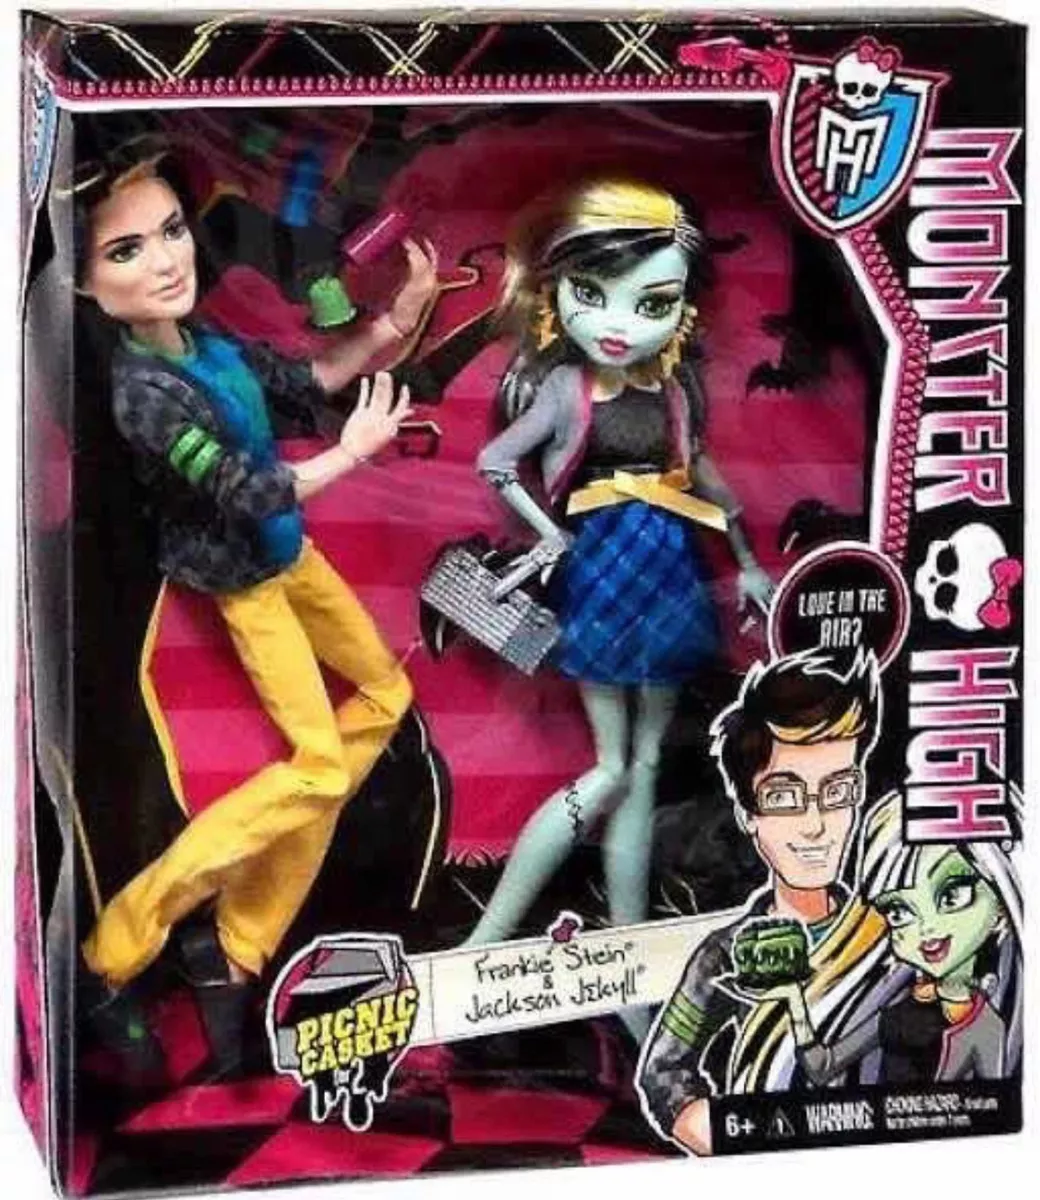 Monster High Picnic Jackson And Frankie Stein Dolls